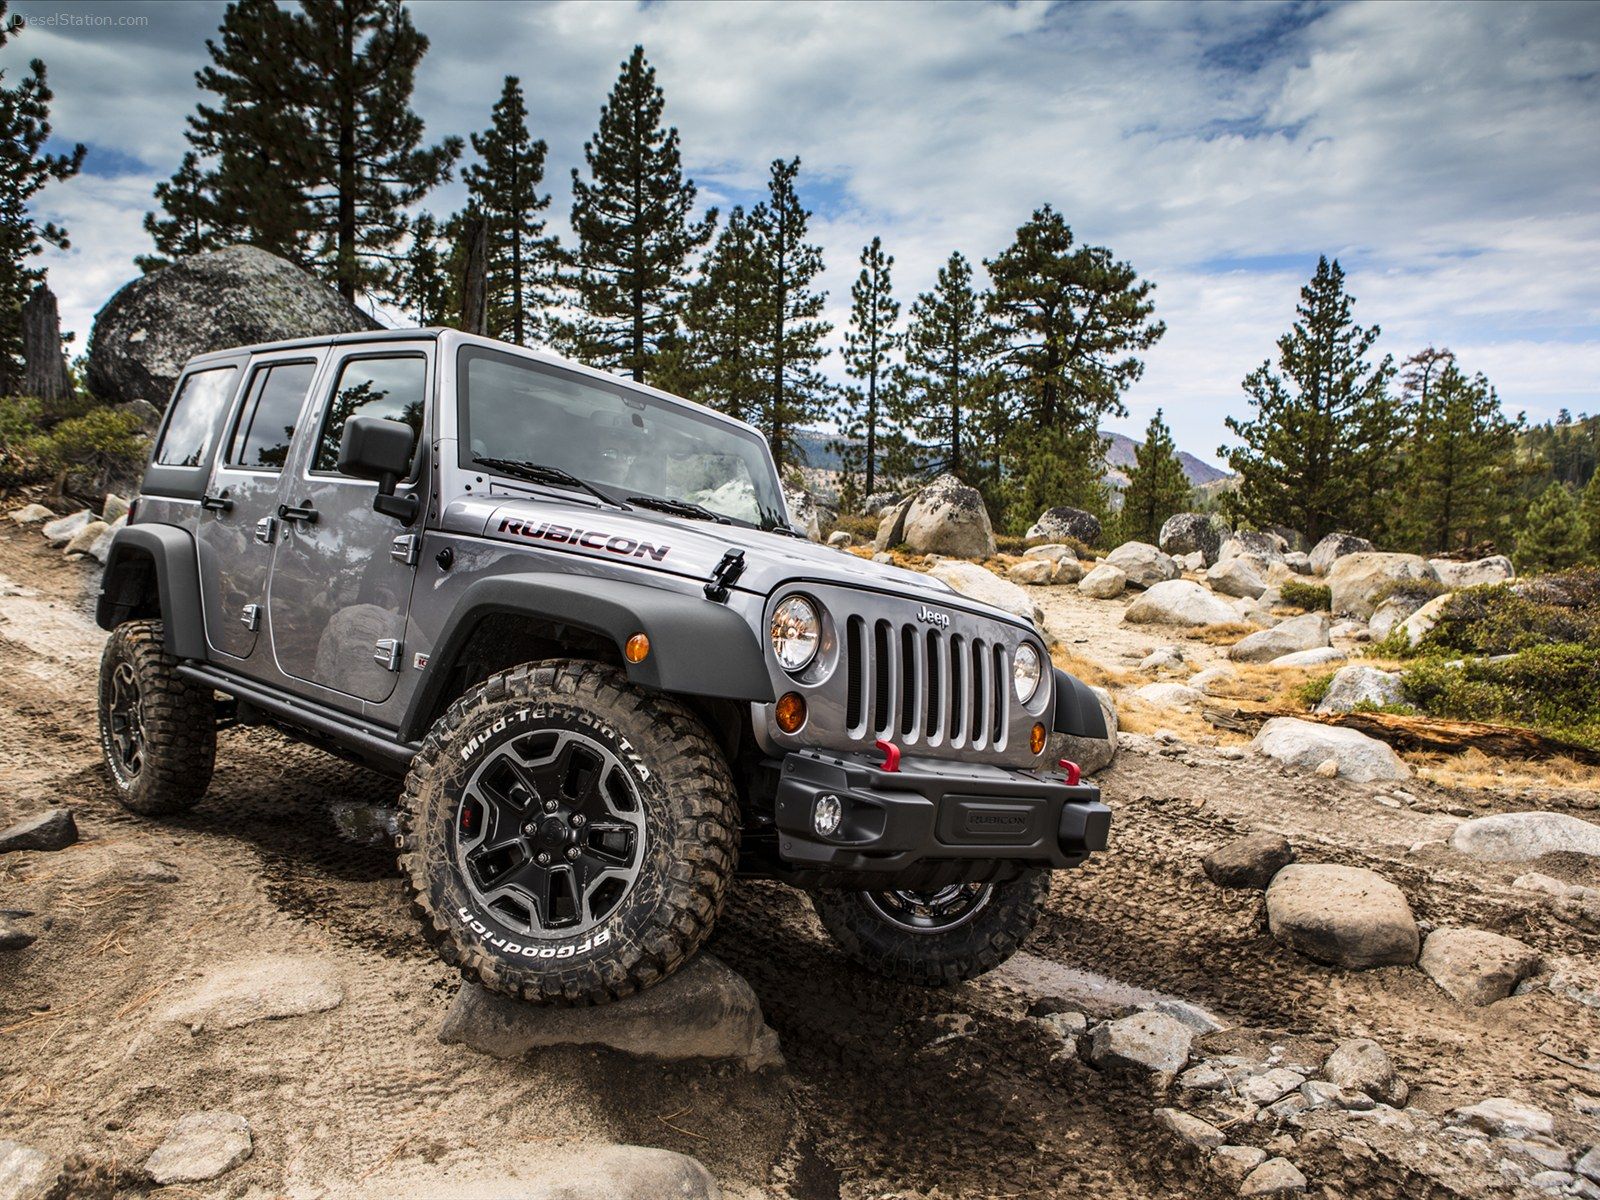 Jeep Wrangler Rubicon 10th Anniversary Edition 2013 Exotic Car Wallpaper of 48, Diesel Station